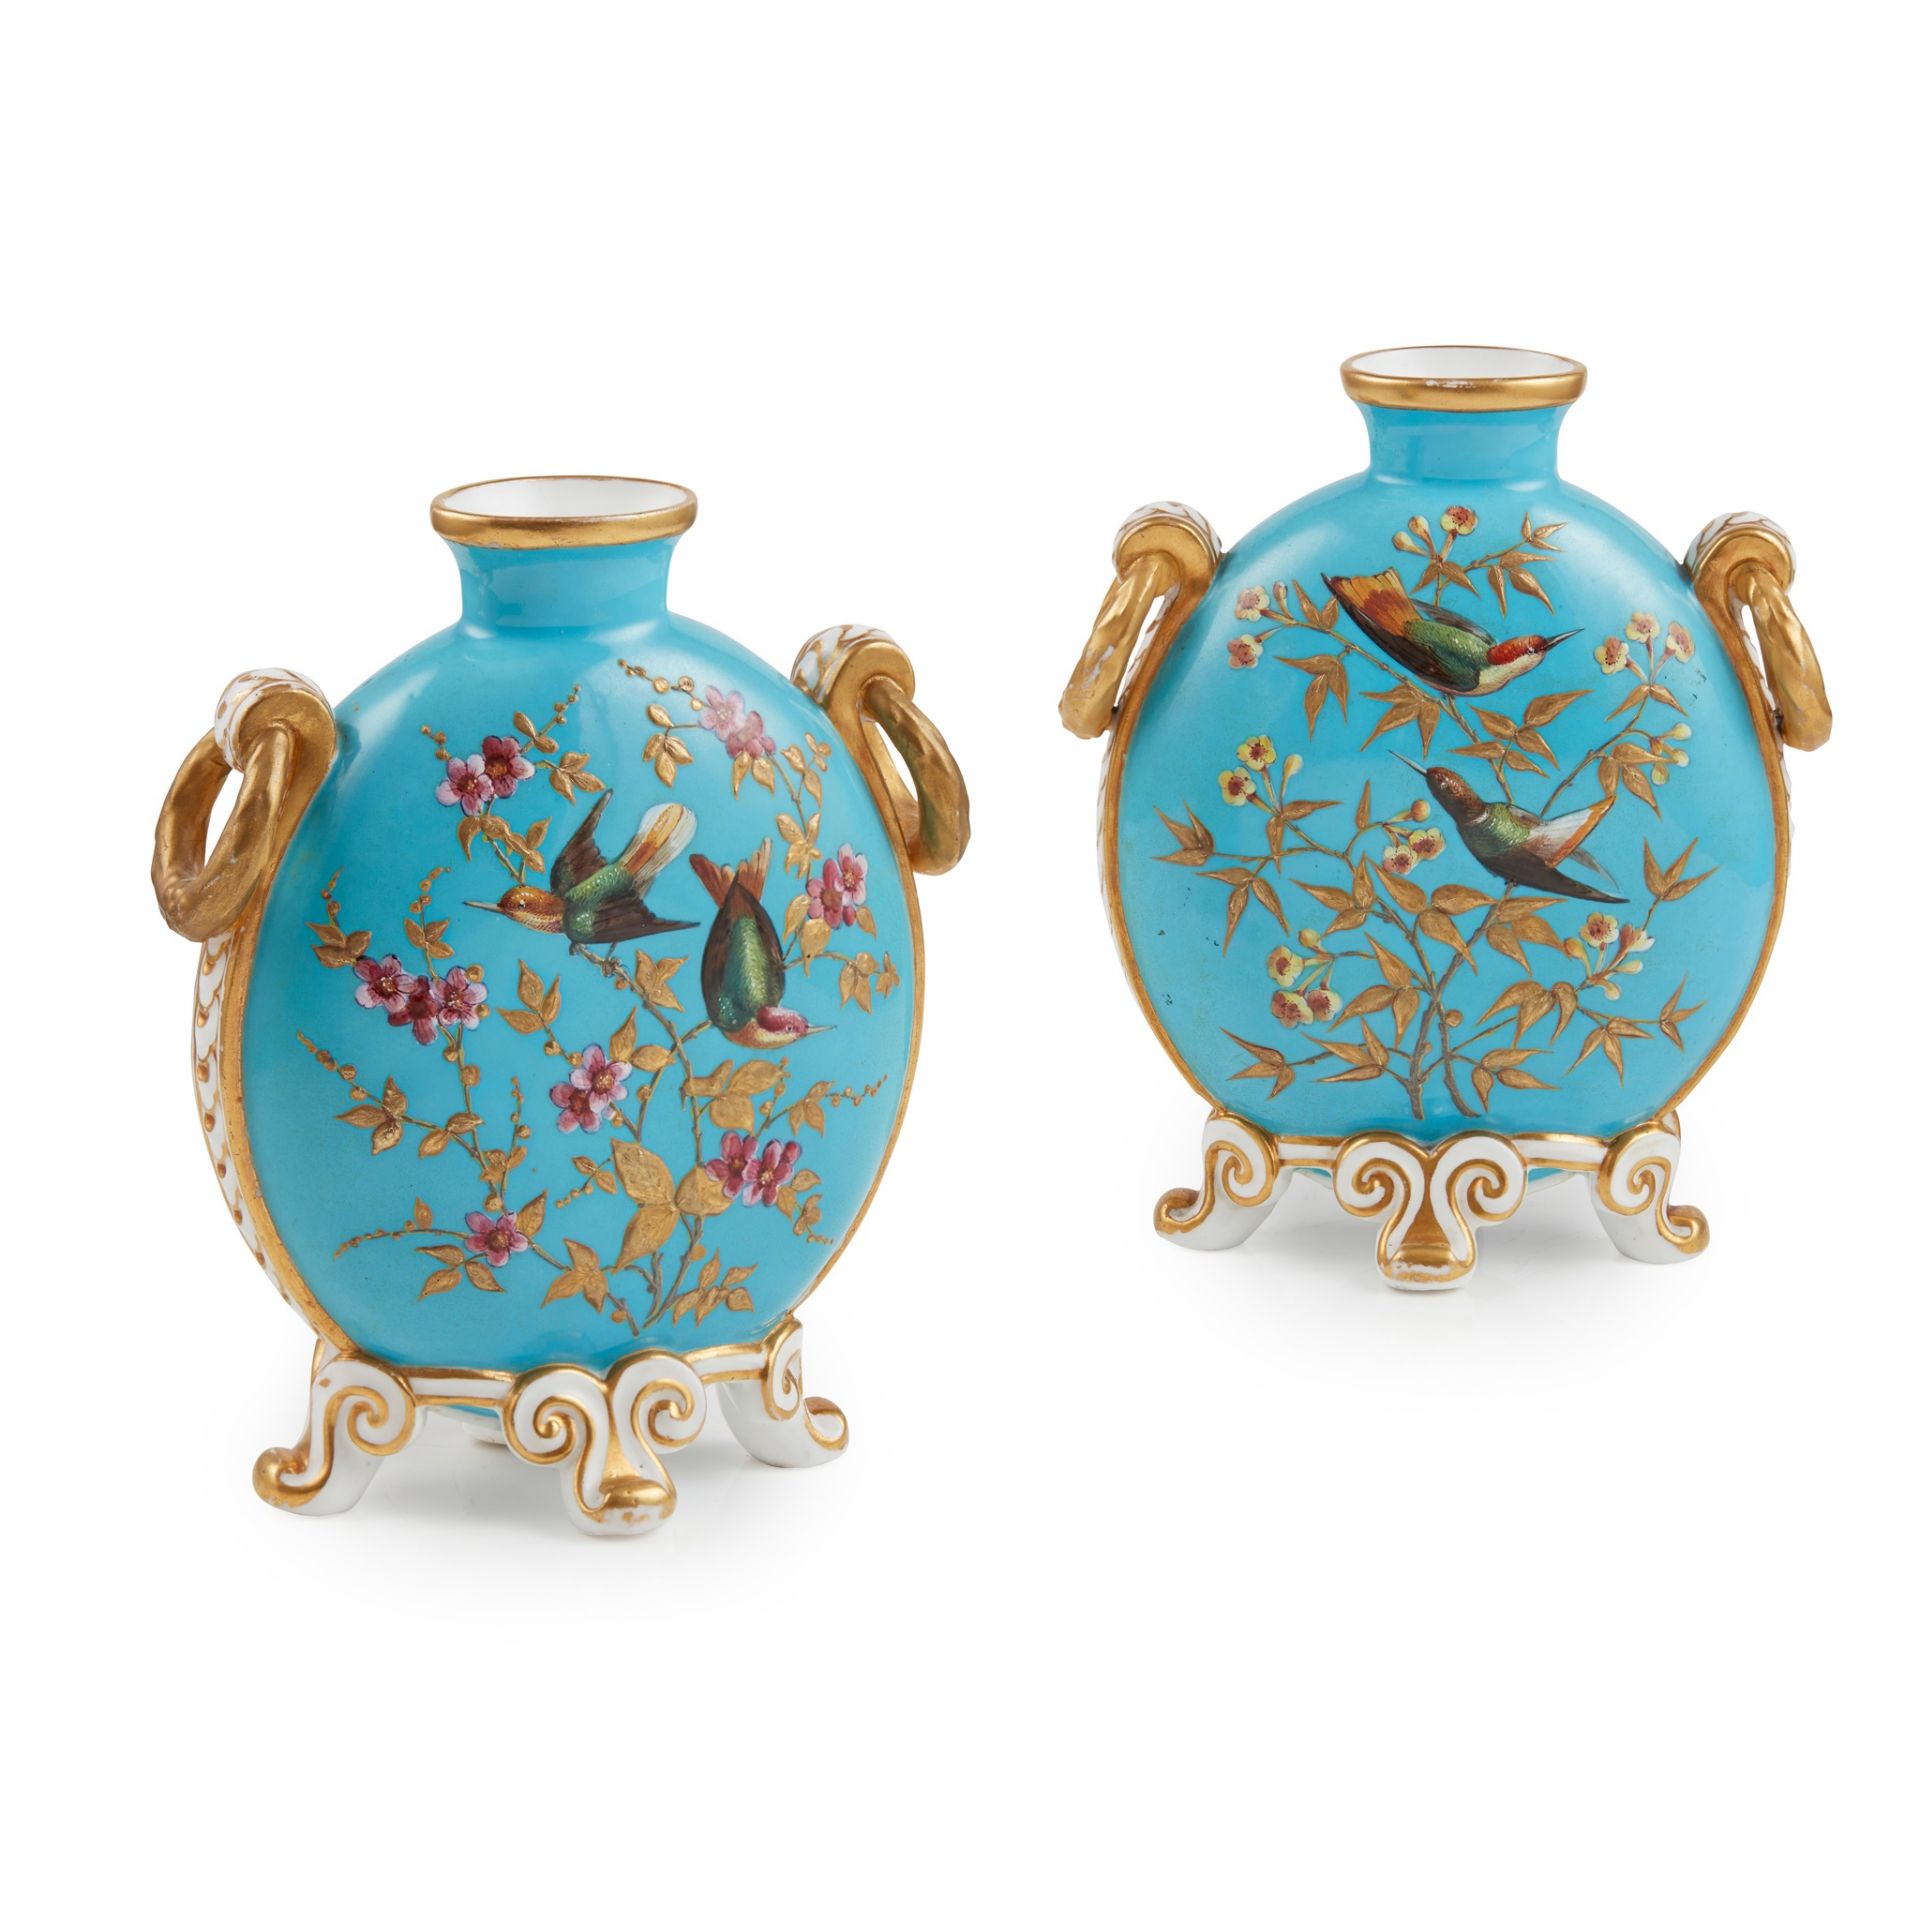 PAIR OF DERBY CROWN PORCELAIN MOONFLASKS LATE 19TH CENTURY - Image 2 of 7